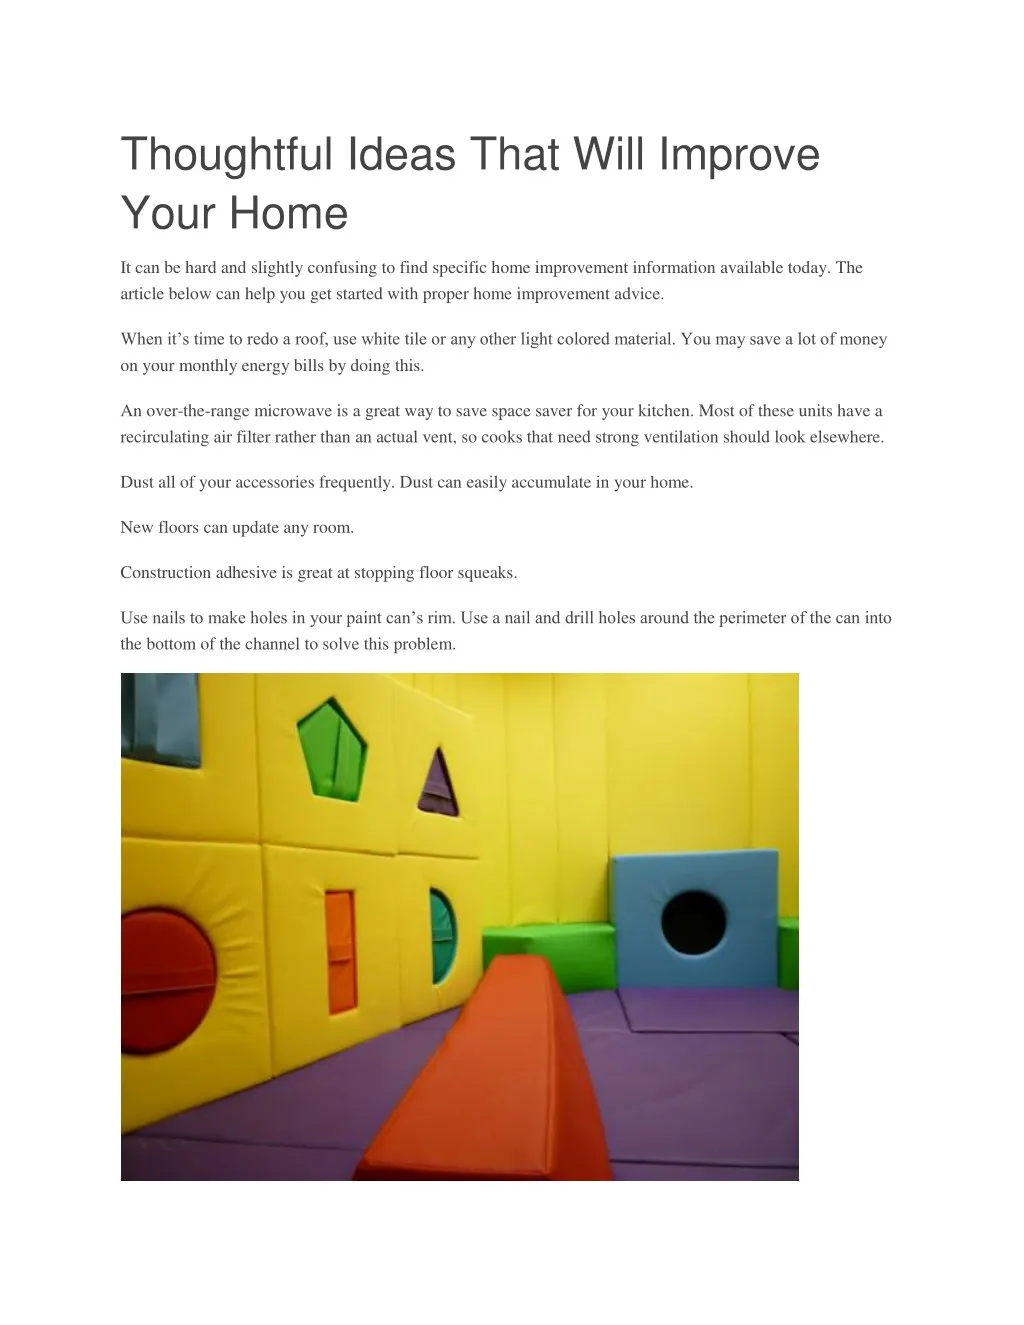 thoughtful ideas that will improve your home